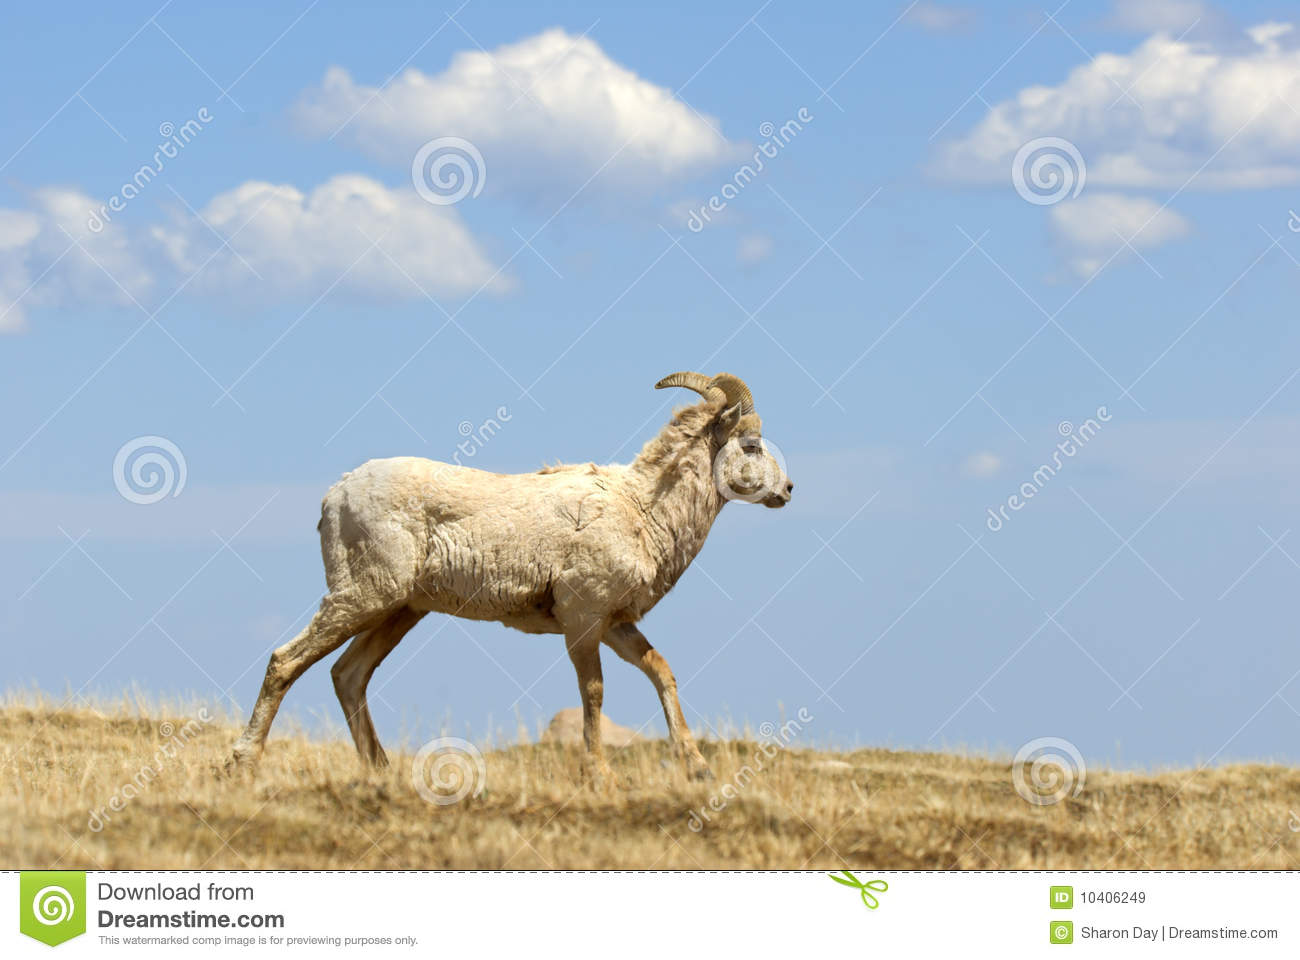 Rocky Mountain Big Horn Sheep Royalty Free Stock Images   Image    